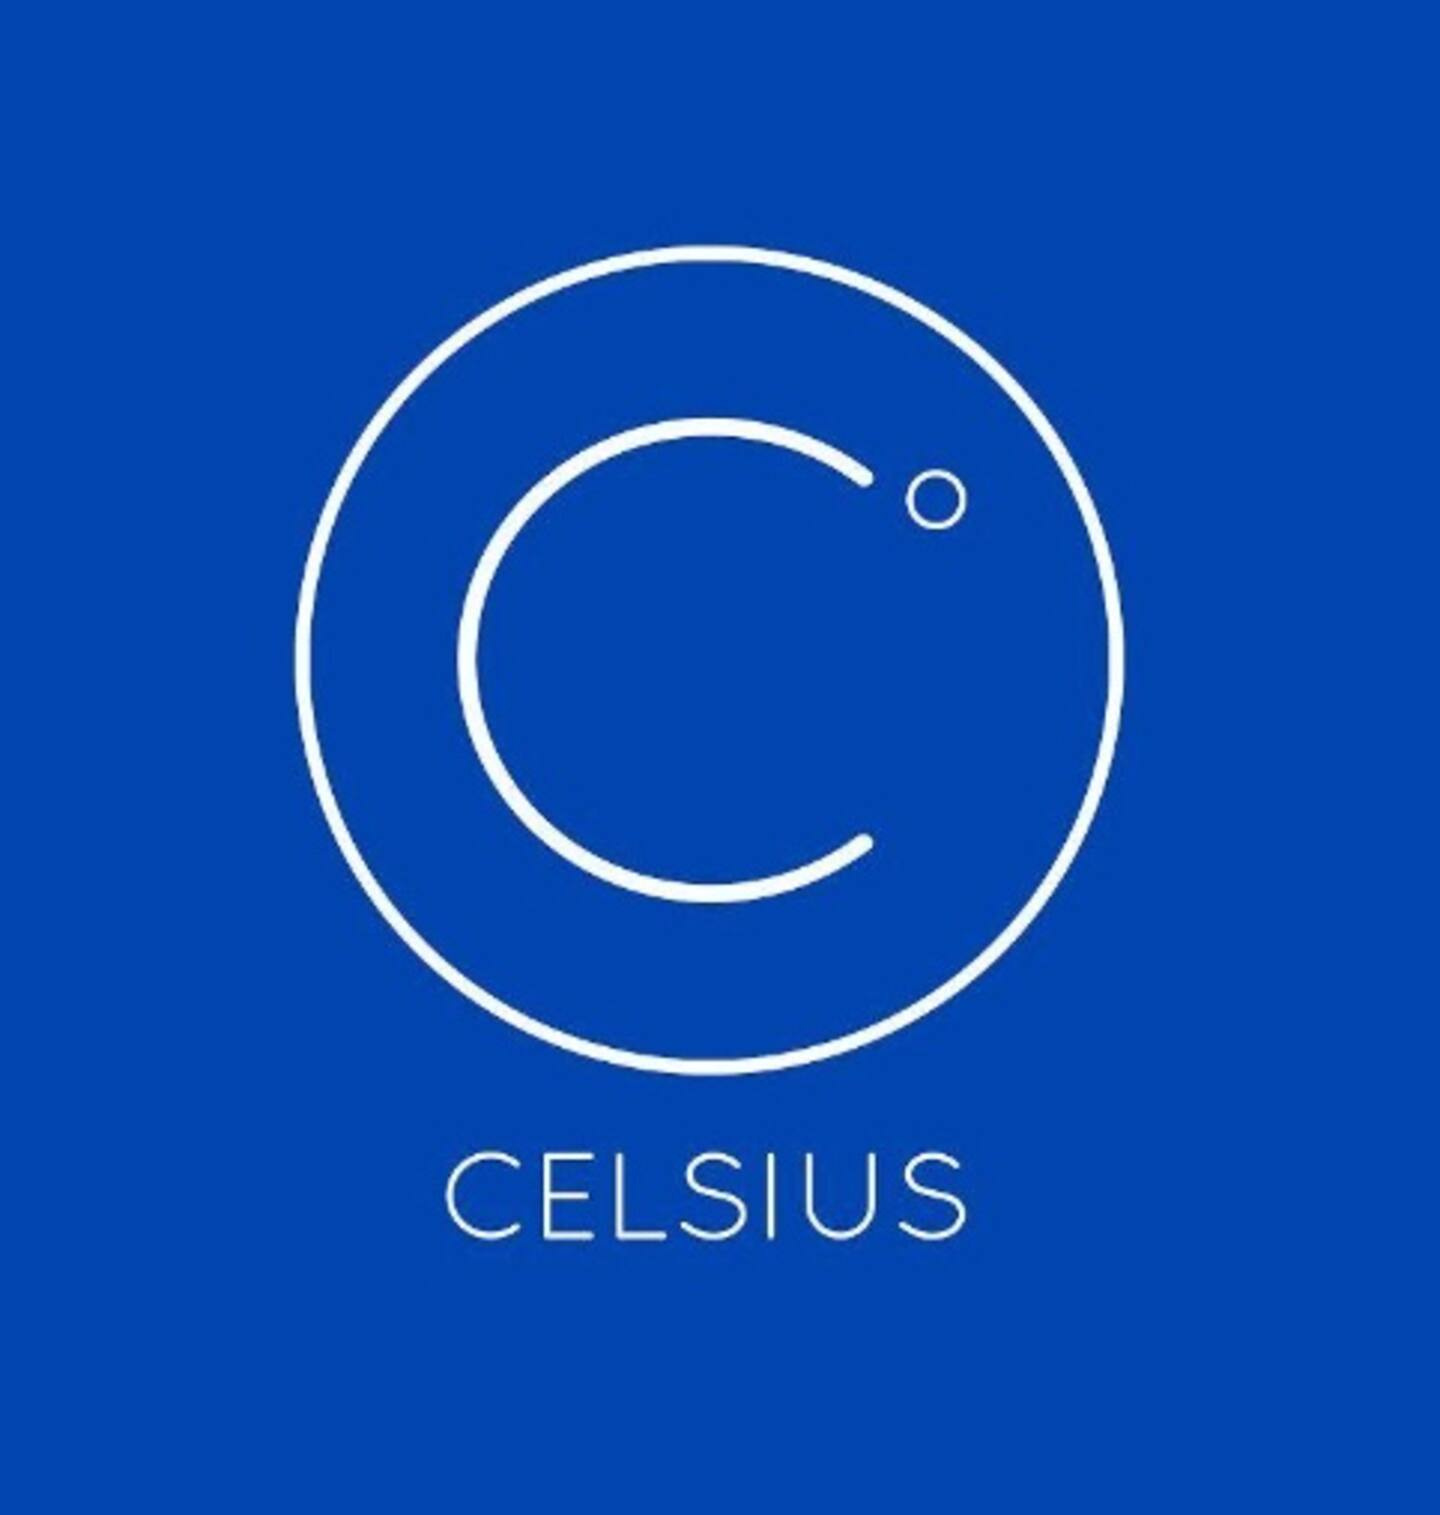 Cryptocurrency: Celsius Network Suspends Withdrawals